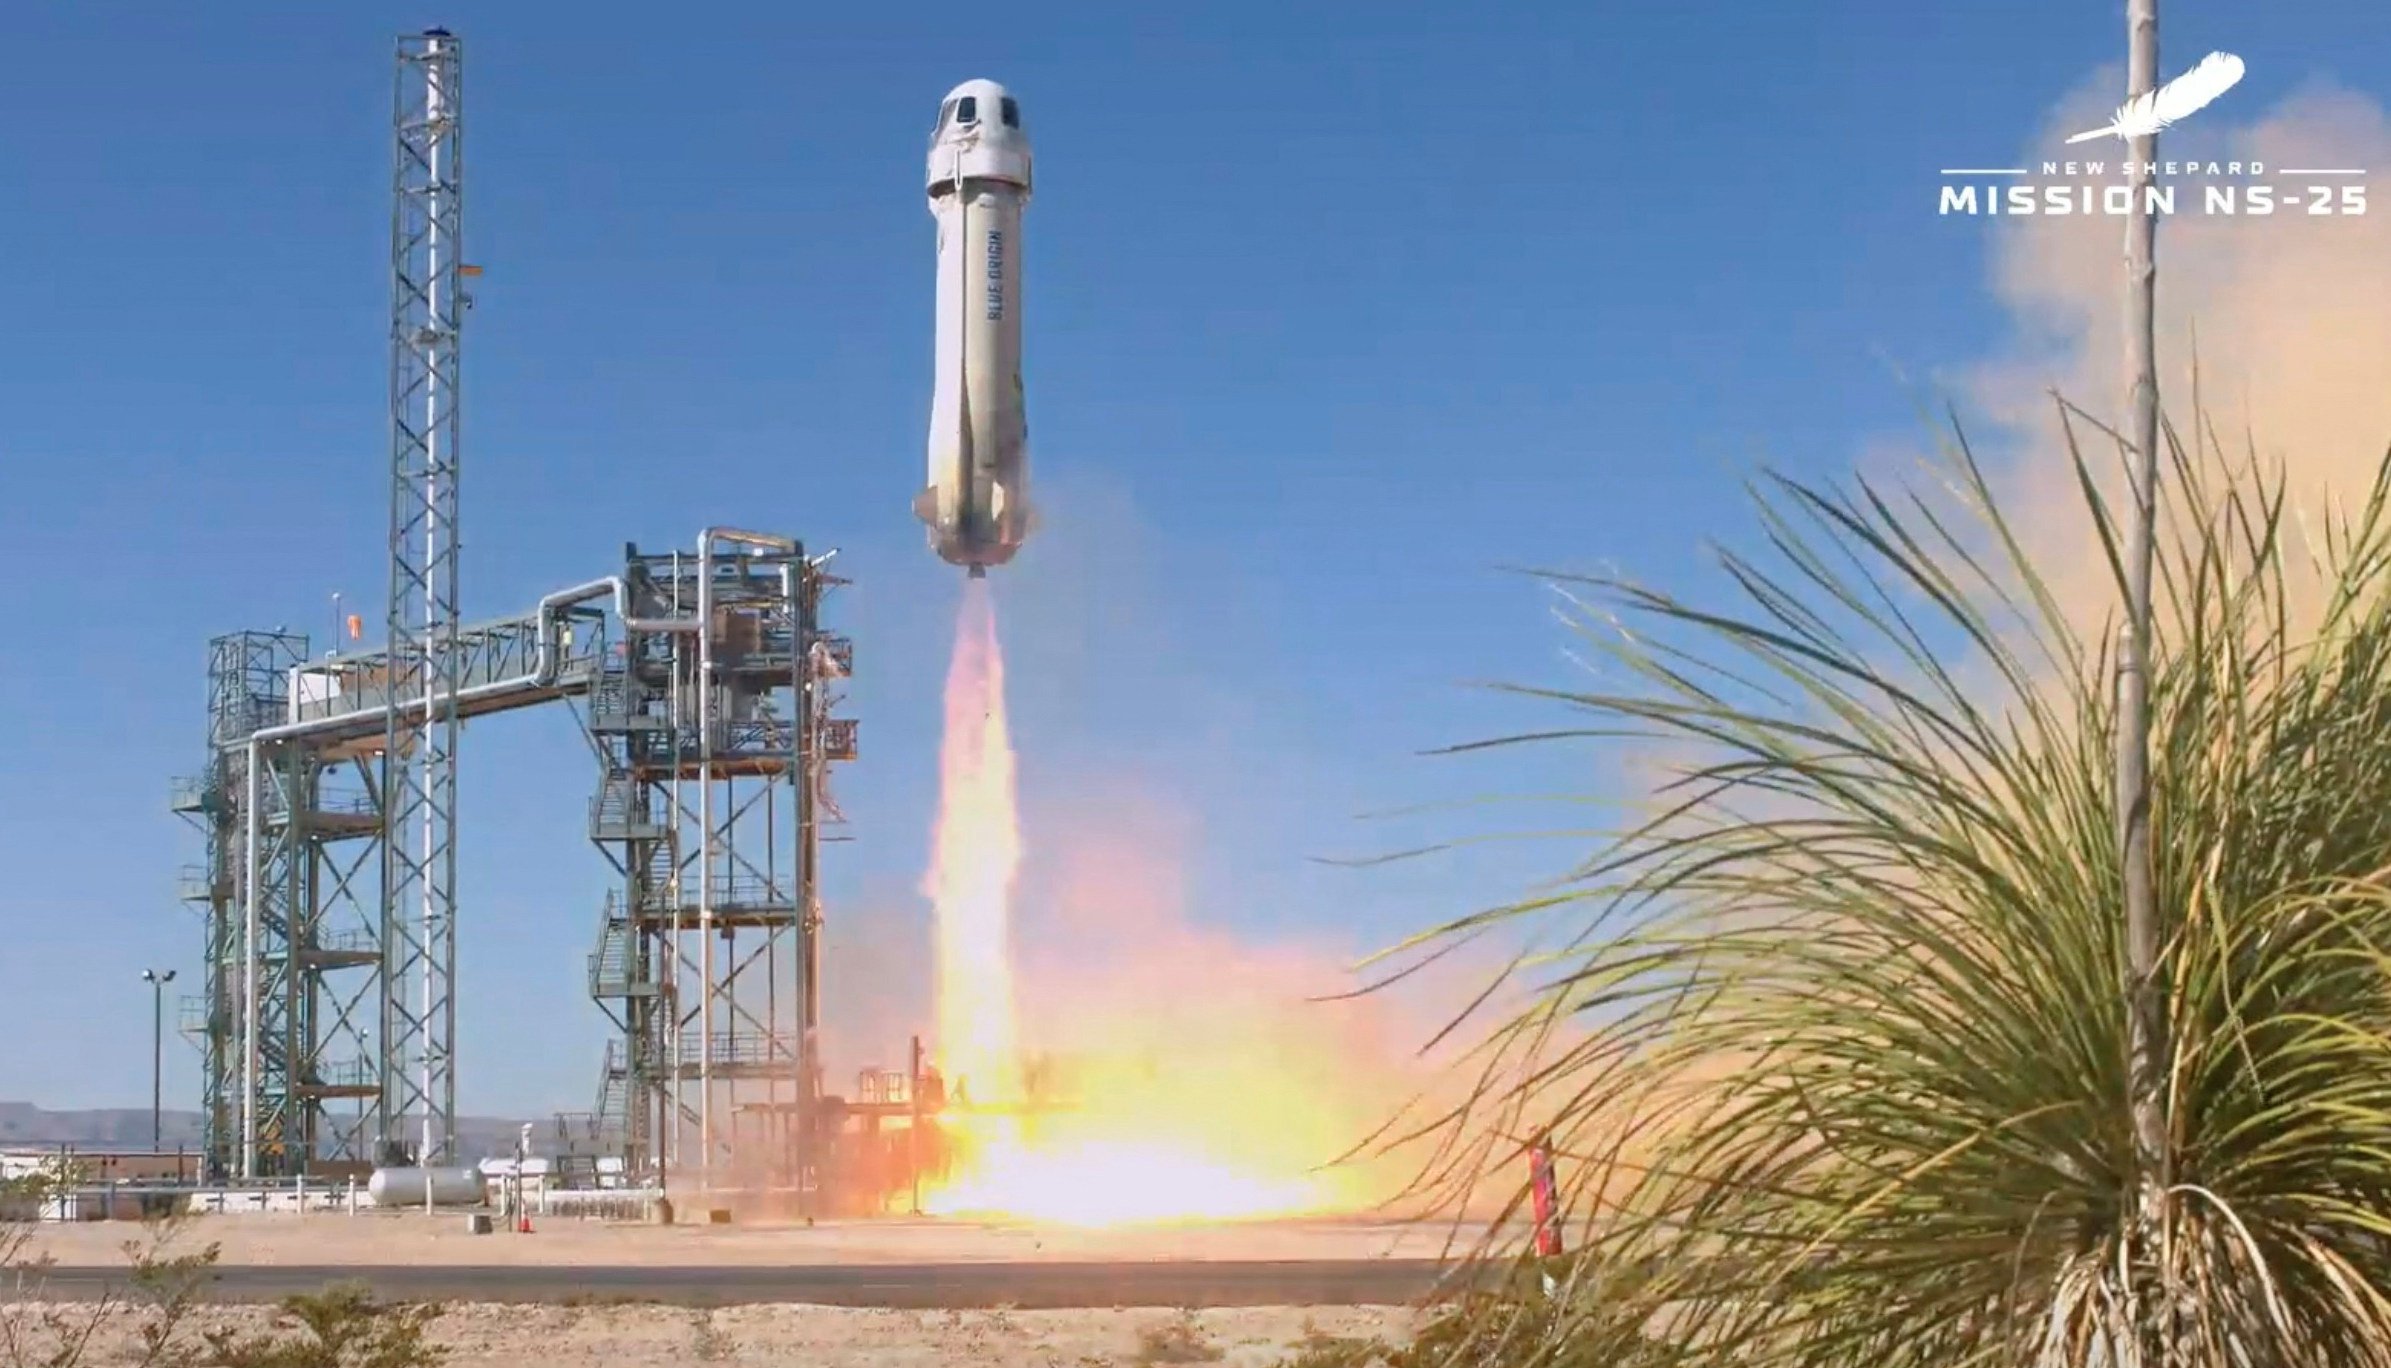 A screen grab of a Blue Origin broadcast shows the Mission NS-25, with the New Shepard 4 rocket and crew capsule, taking off from the Blue Origin base near Van Horn, Texas. Photo: AFP